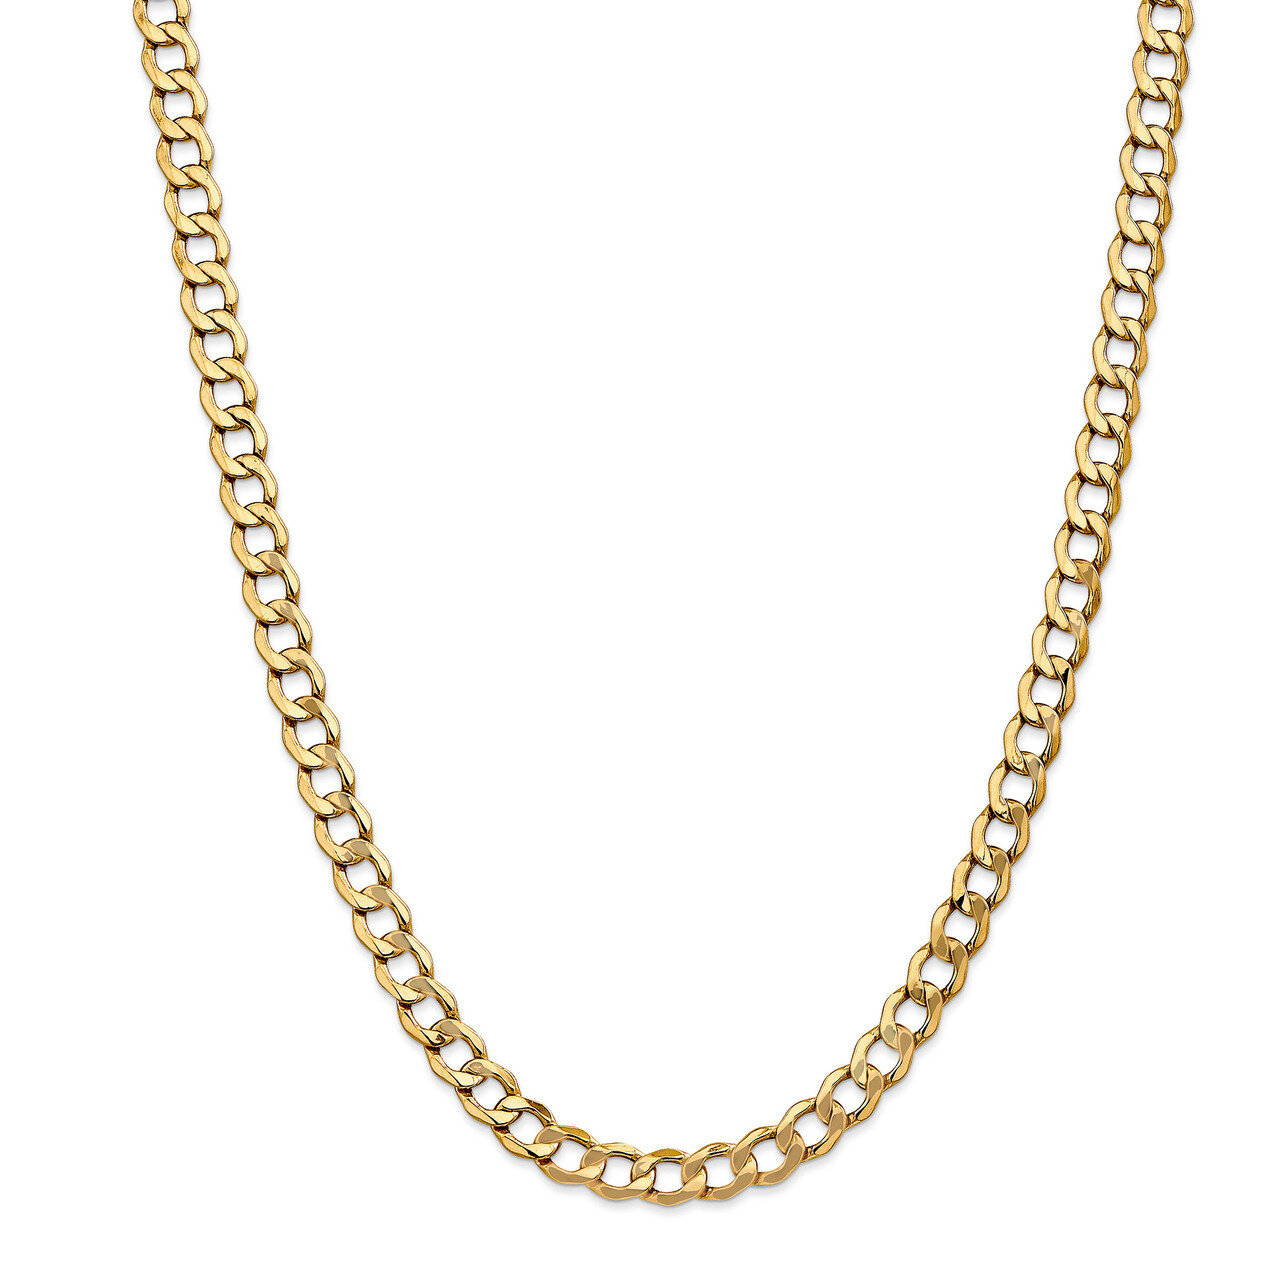 7.0mm Semi-Solid Curb Link Chain 24 Inch 14k Gold HB-1328-24